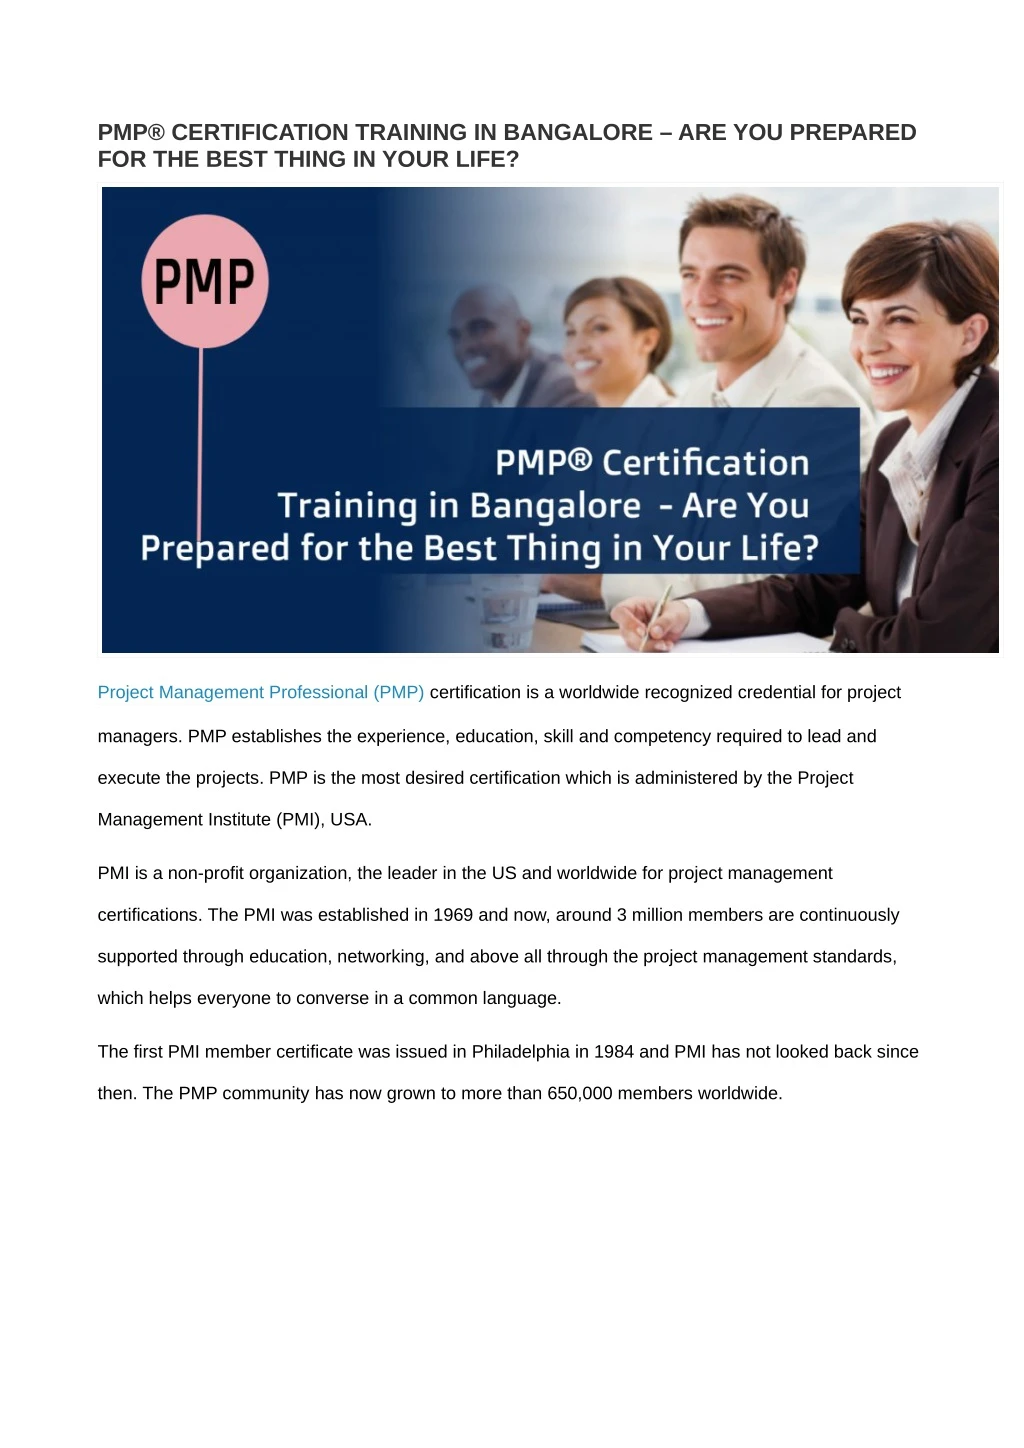 pmp certification training in bangalore